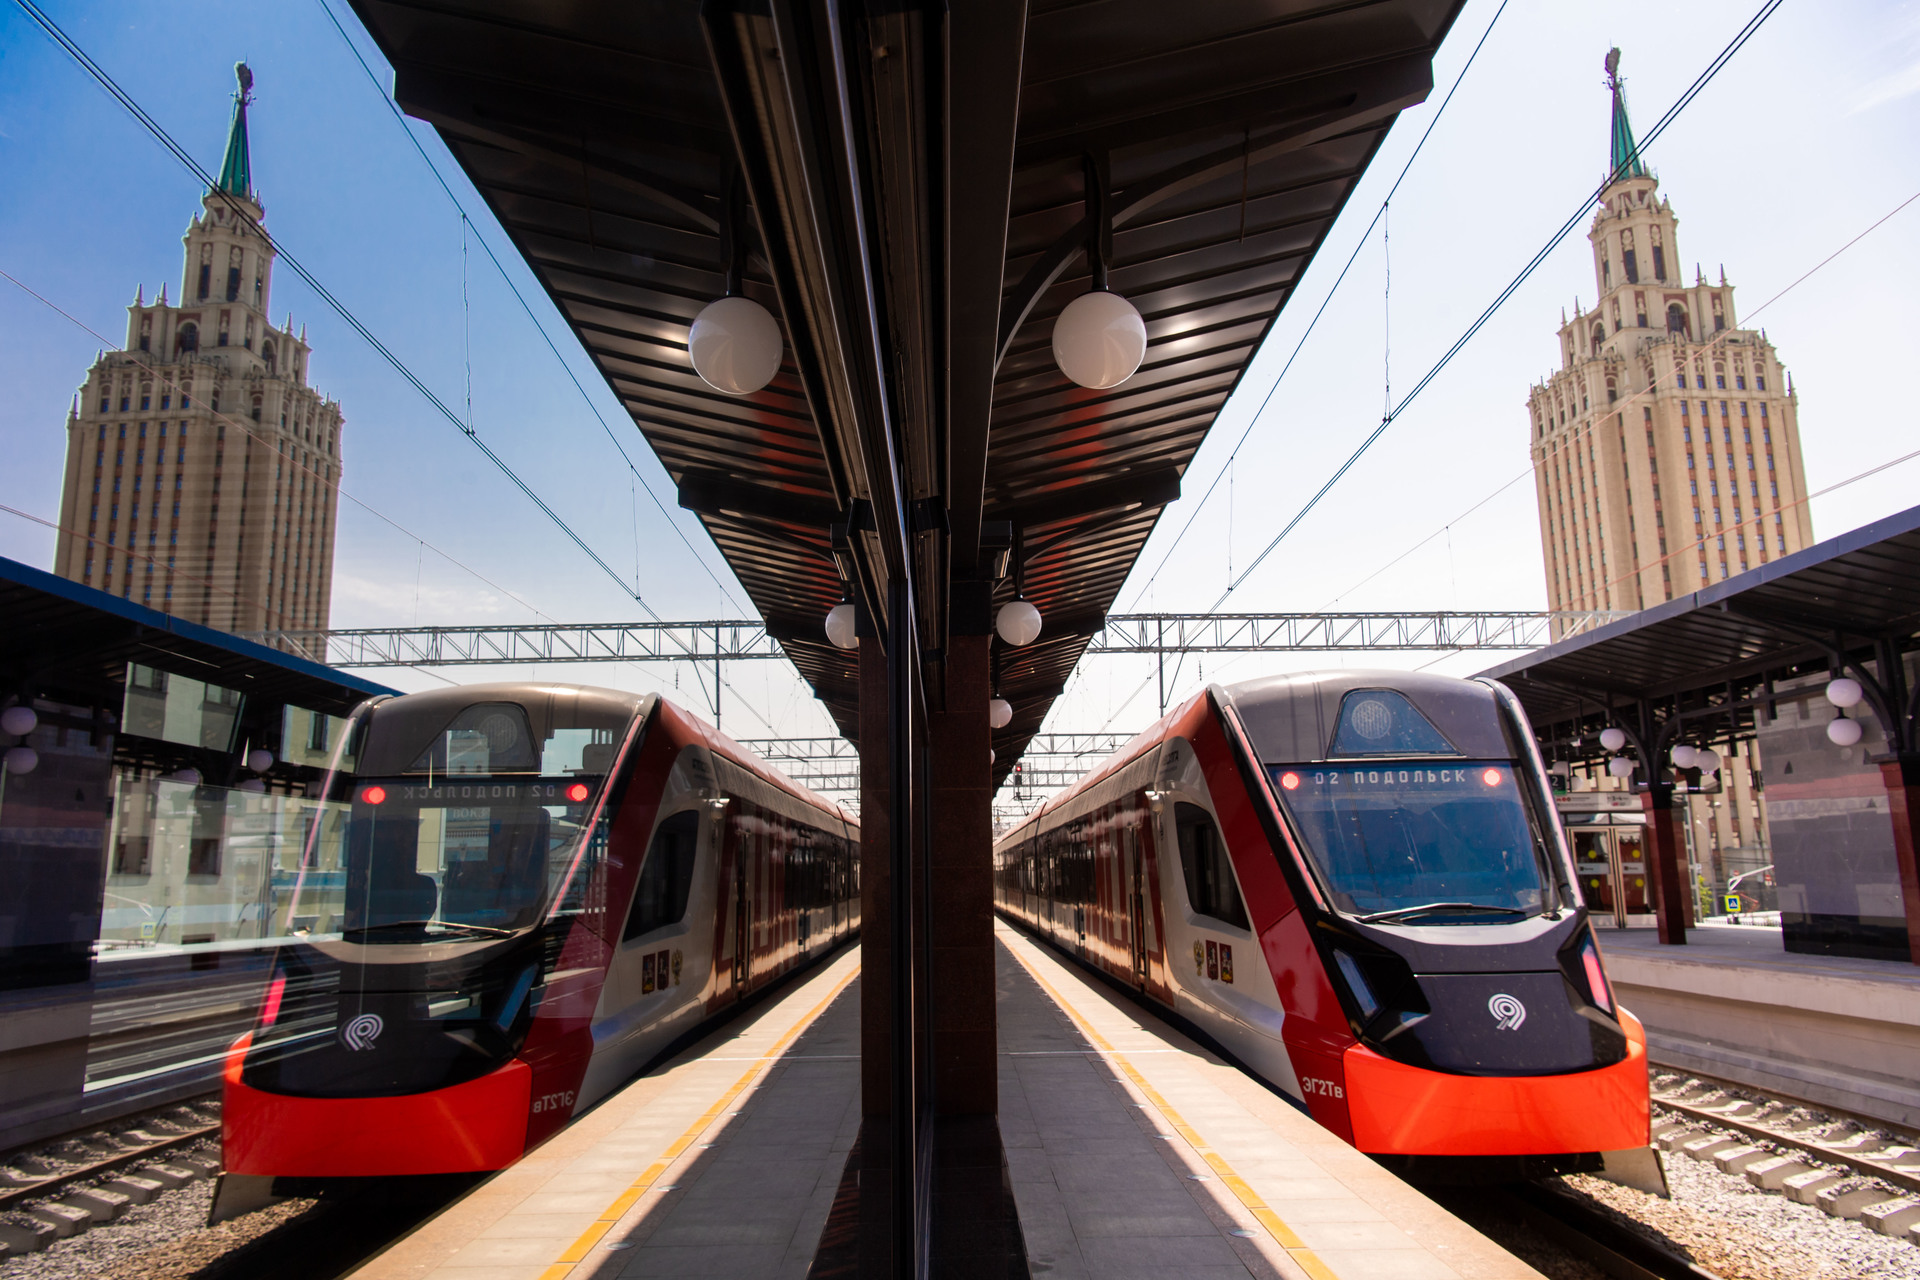 The MCD-1 and MCD-2 have connected more than 40 Moscow districts and several cities in the Moscow region. The train fleet was completely renewed on the diameters.